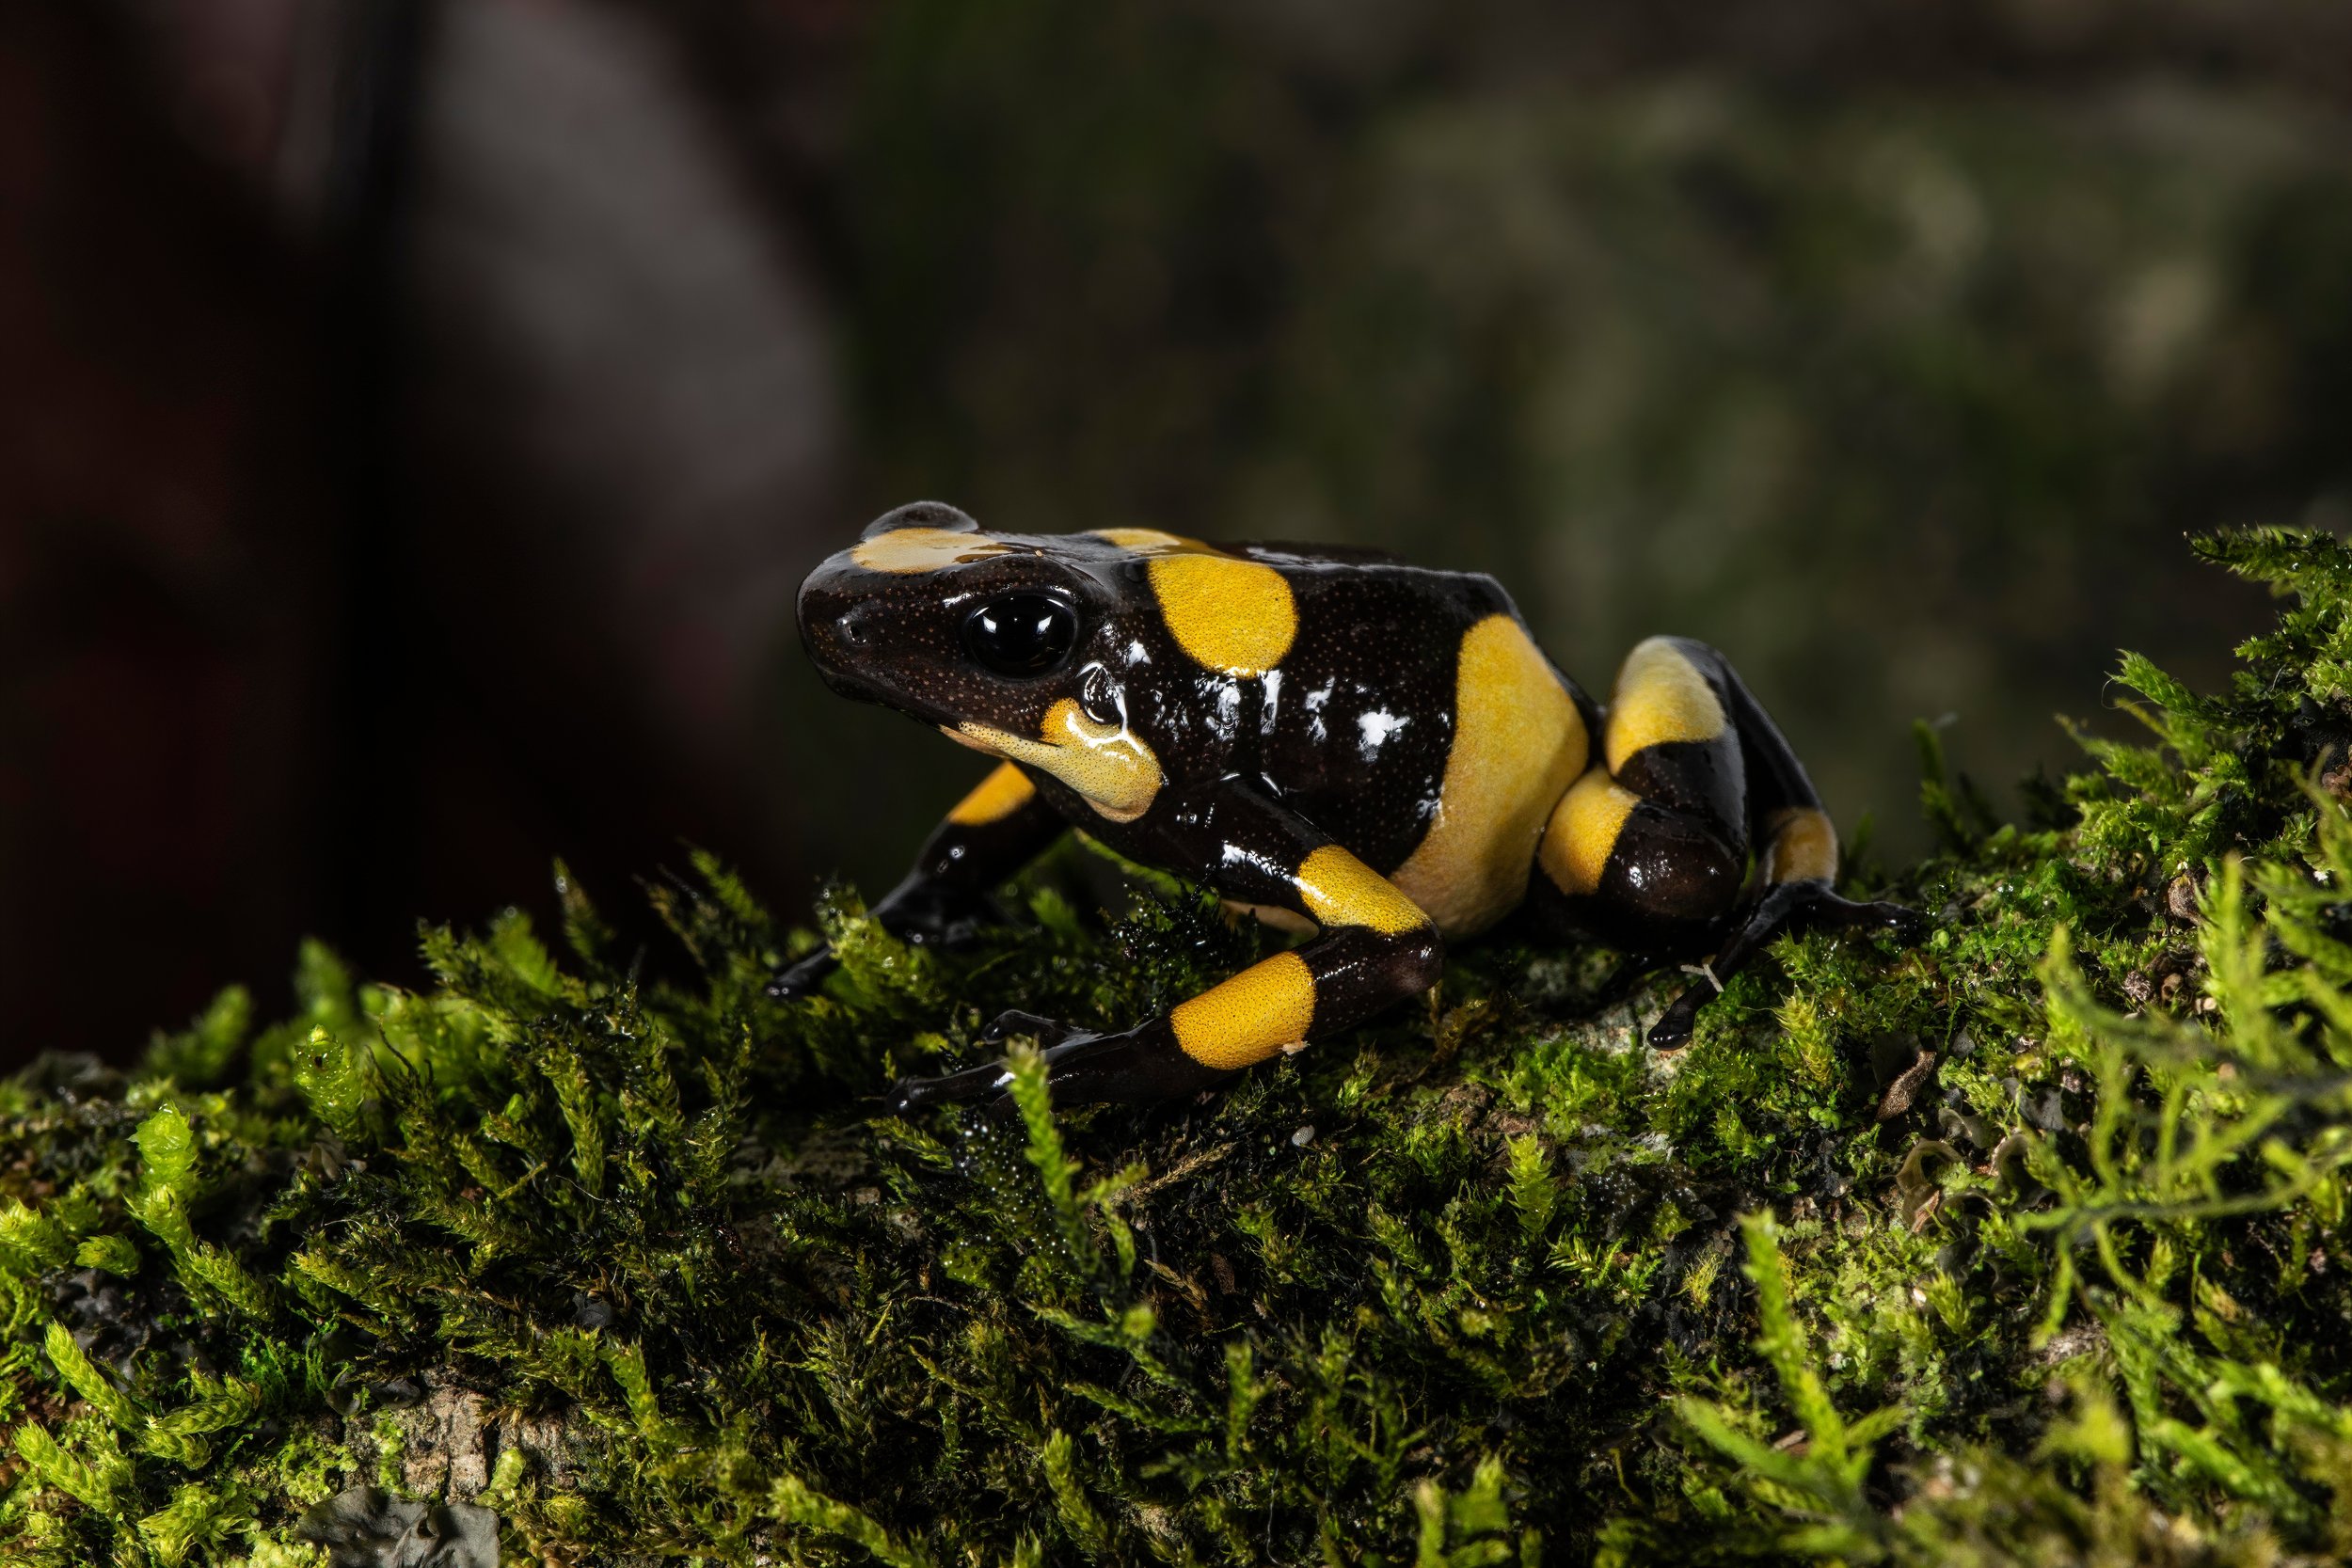  Harlequin Poison Frog, yellow saddle form,  Oophaga histrionica , Colombia. Image: ©P. Rockstroh 